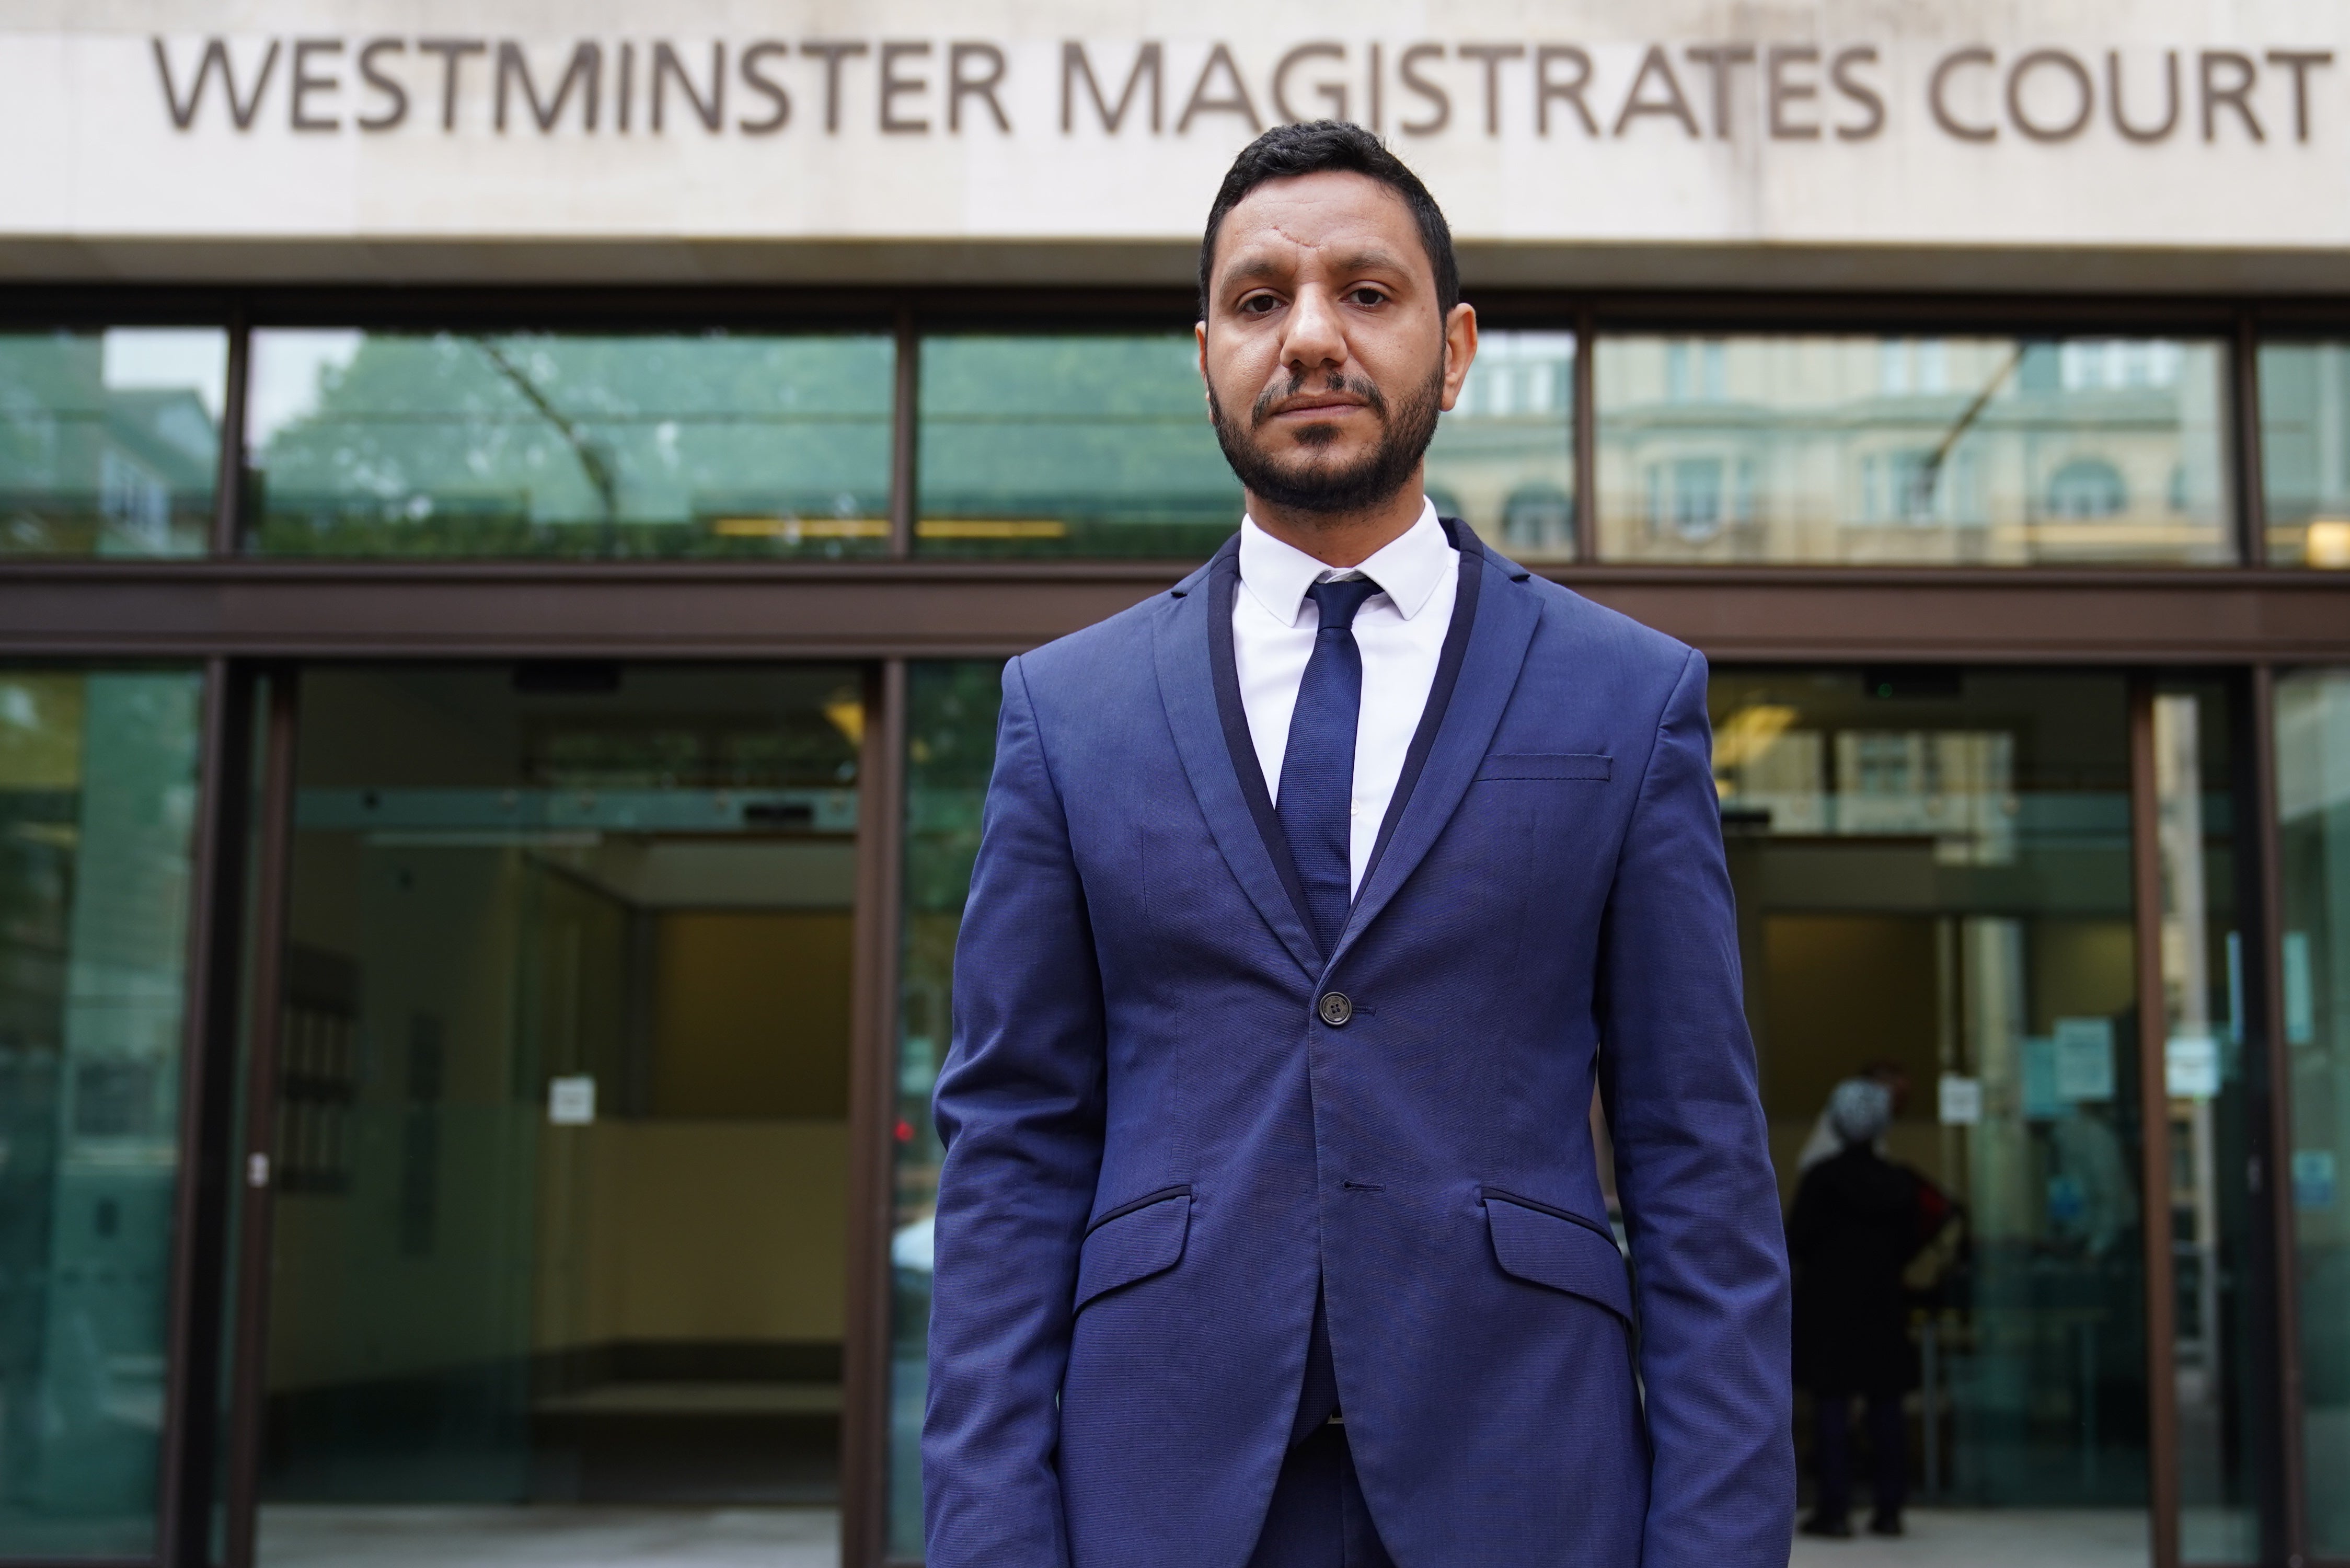 Sayed Ahmed Alwadaei has been waiting three years for a decision on his British citizenship application